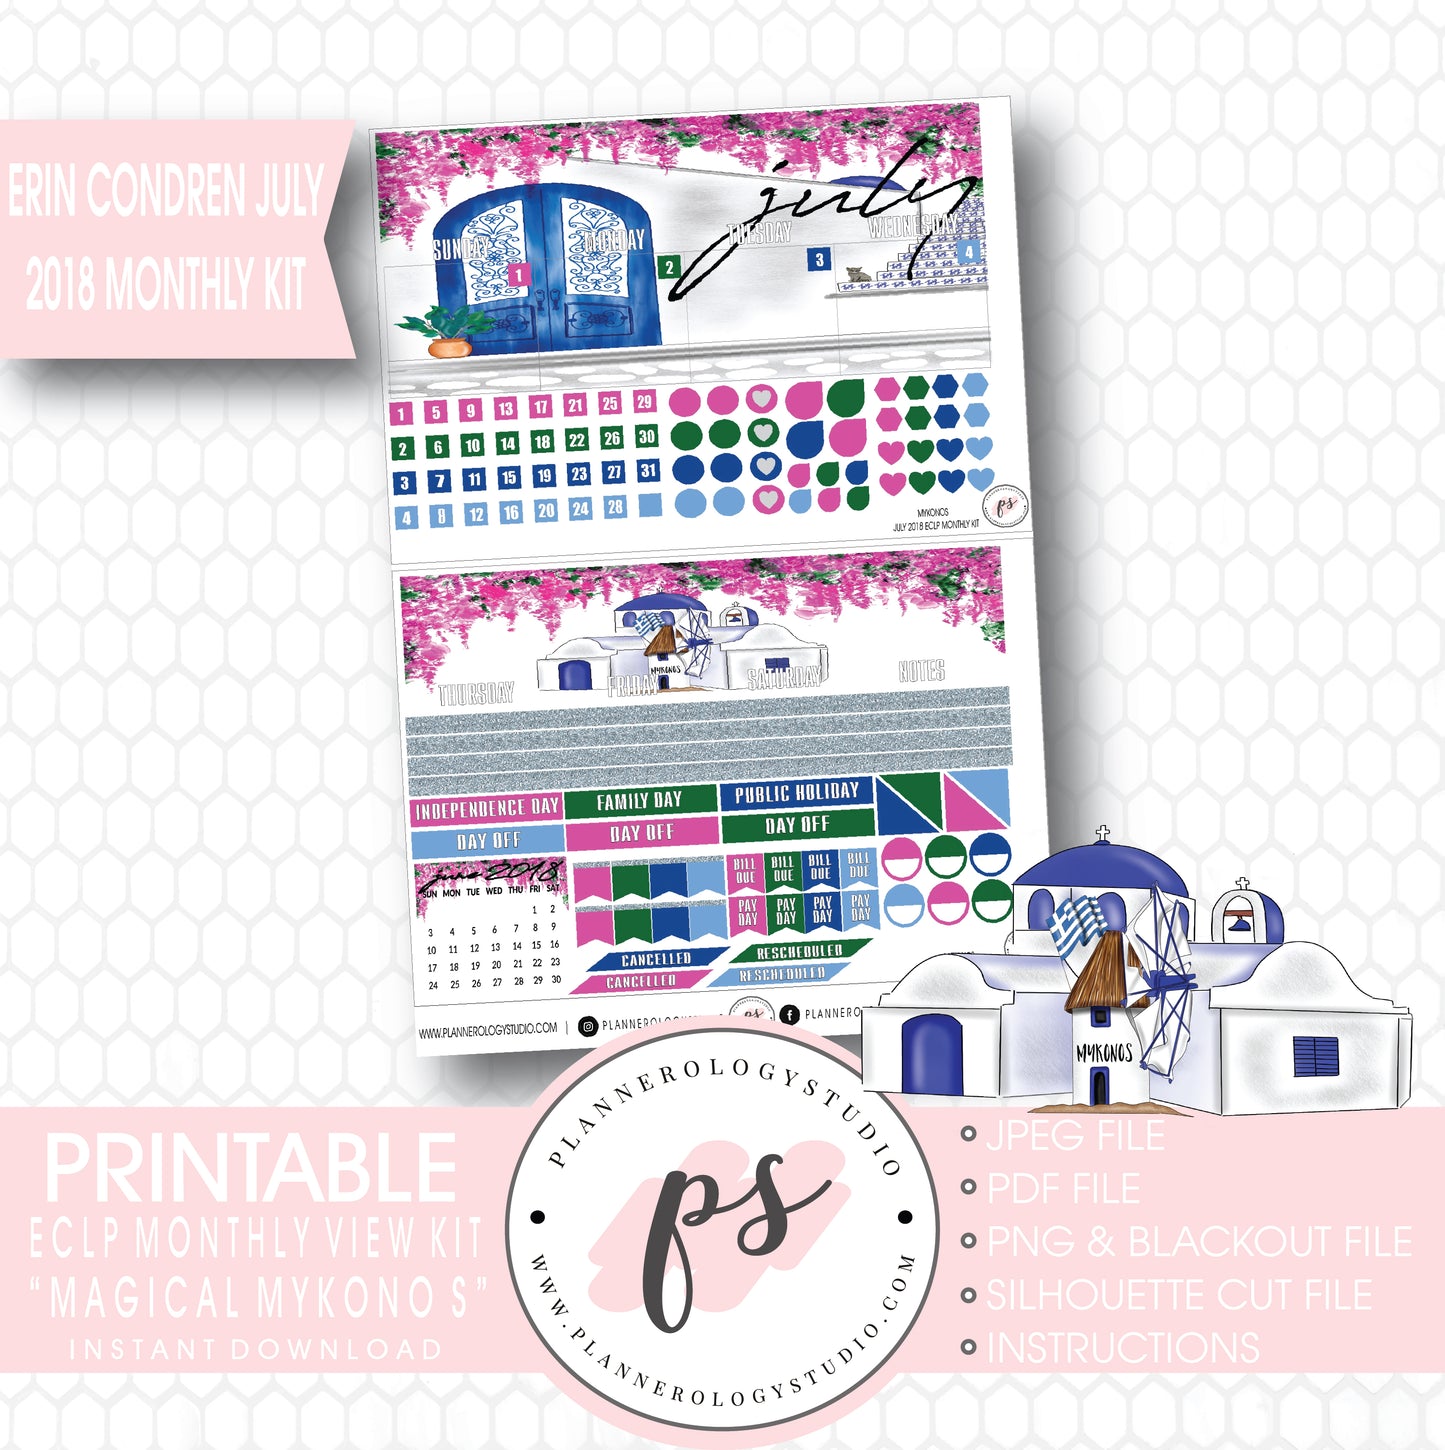 Magical Mykonos July 2018 Monthly View Kit Digital Printable Planner Stickers (for use with Erin Condren) - Plannerologystudio